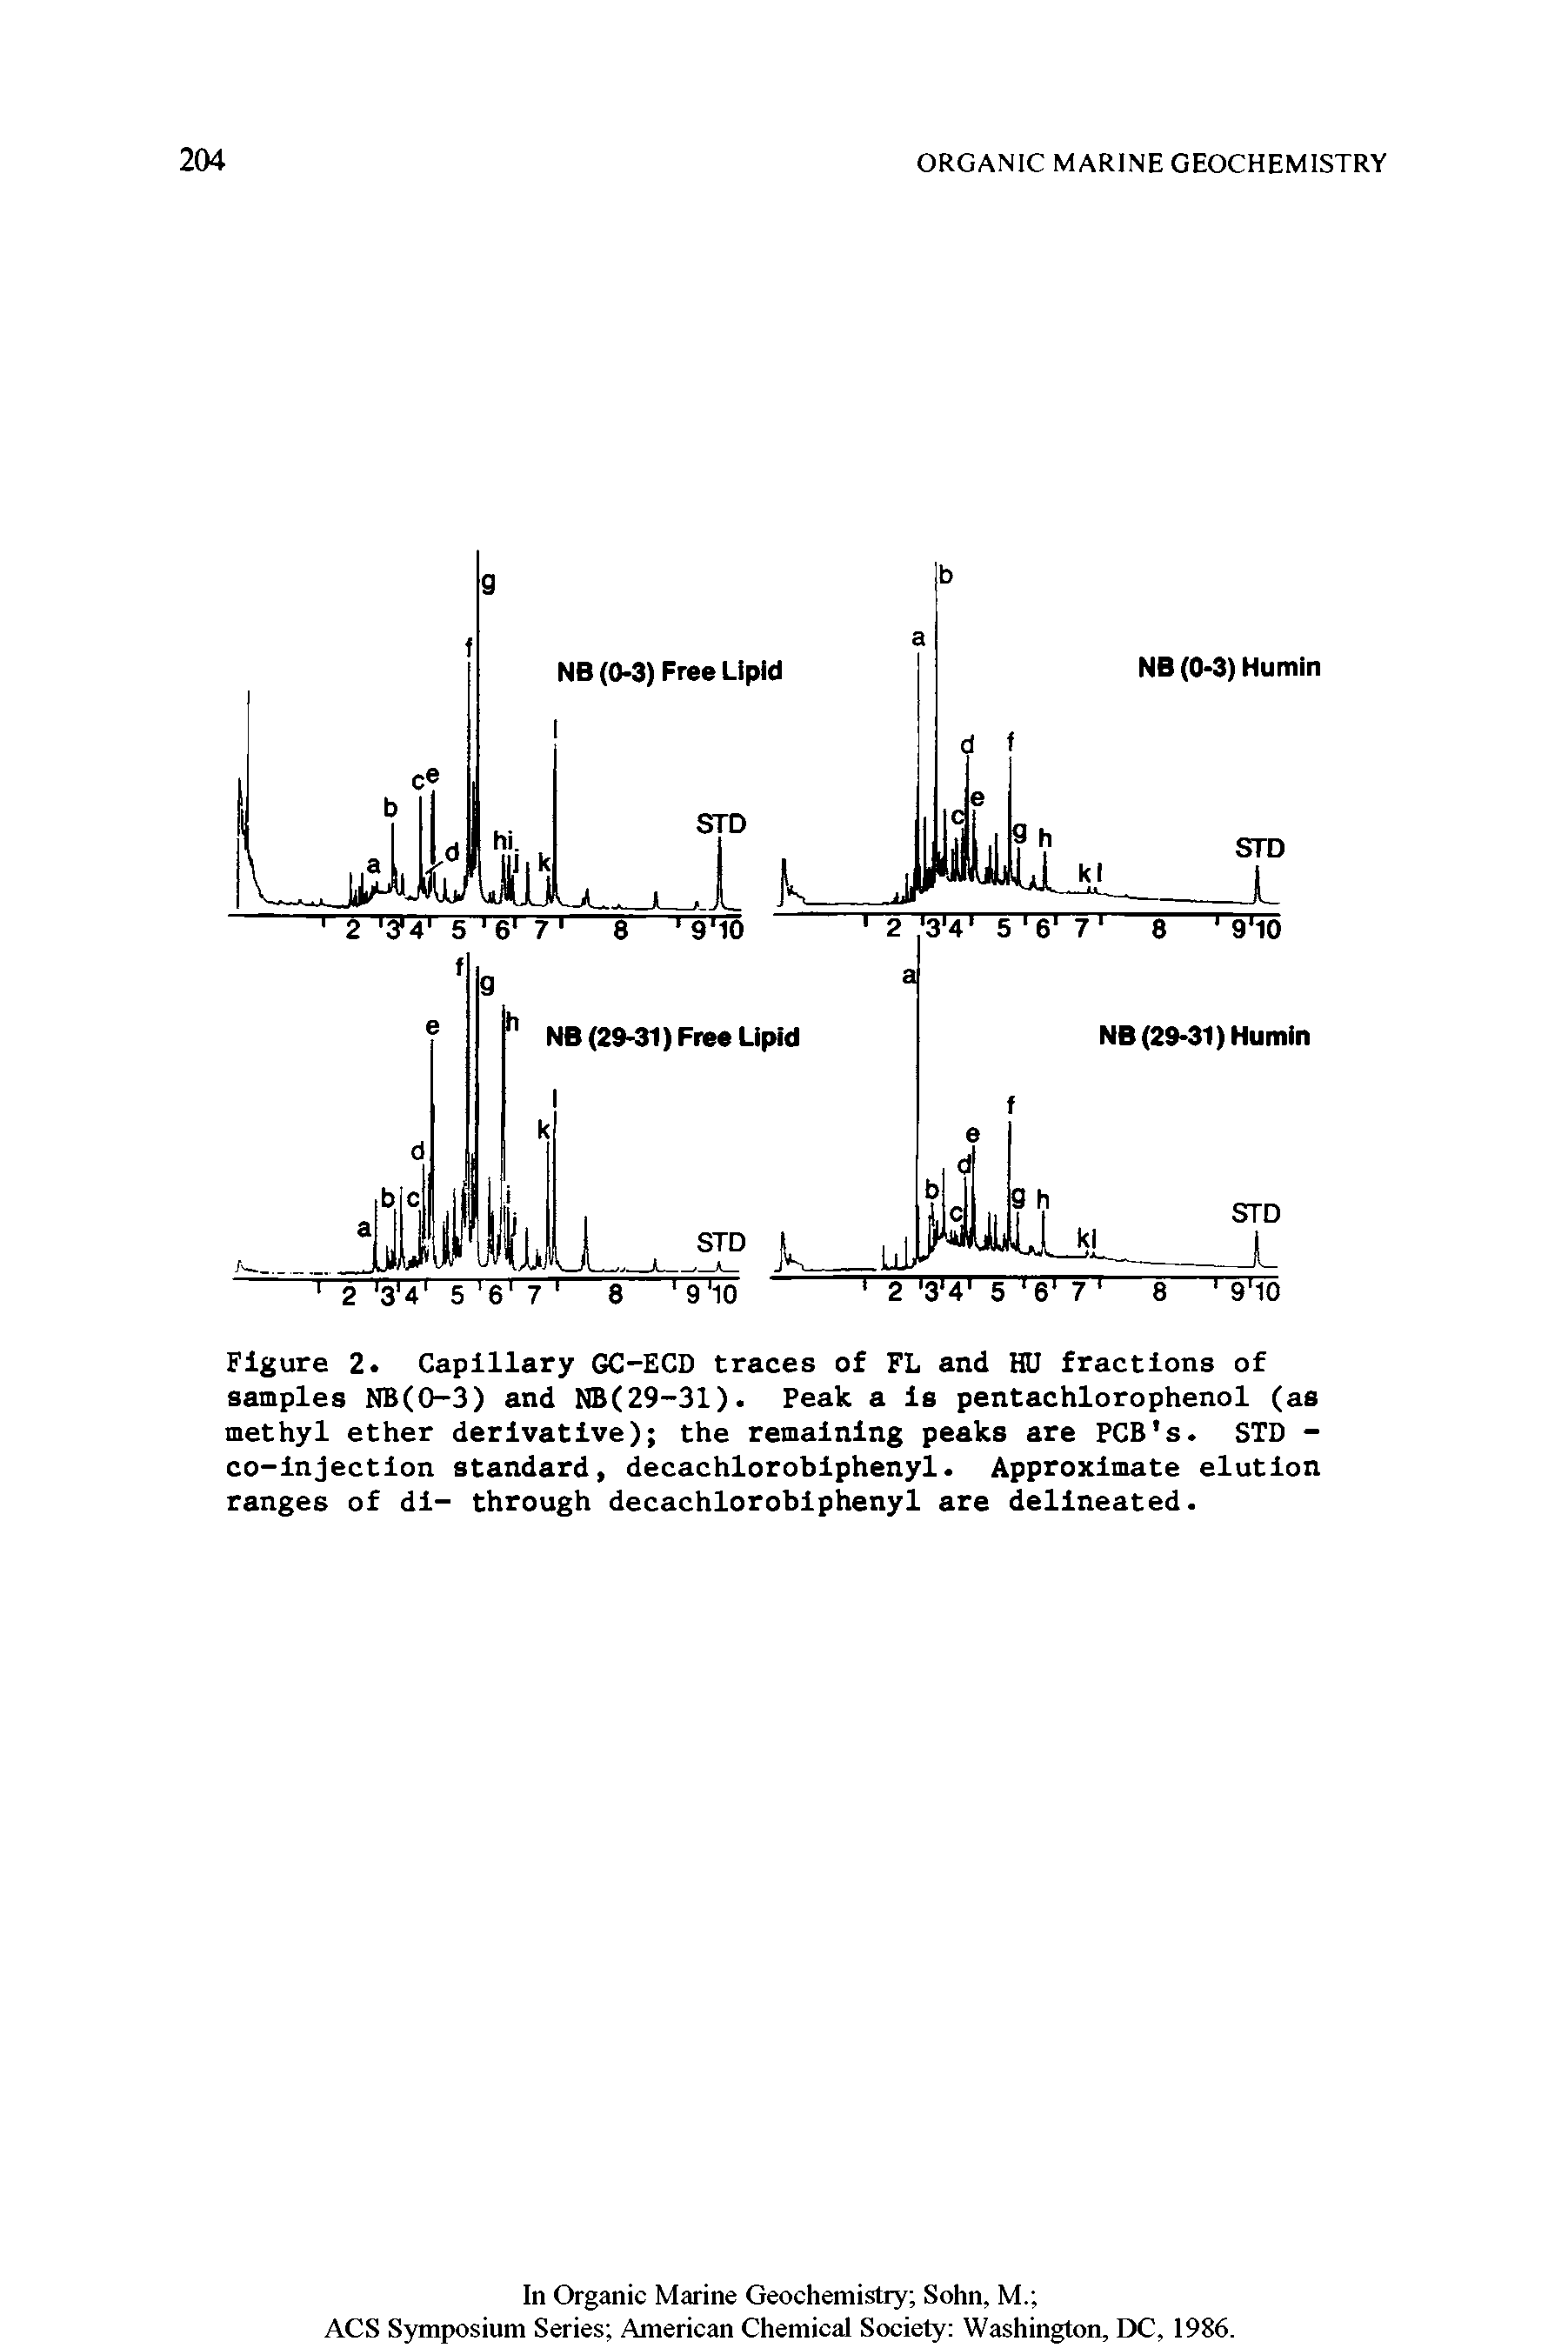 Figure 2. Capillary GC-ECD traces of FL and HU fractions of samples NB(0-3) and NB(29-31). Peak a is pentachlorophenol (as methyl ether derivative) the remaining peaks are PCB s. STD -co-injection standard, decachloroblphenyl. Approximate elution ranges of di- through decachloroblphenyl are delineated.